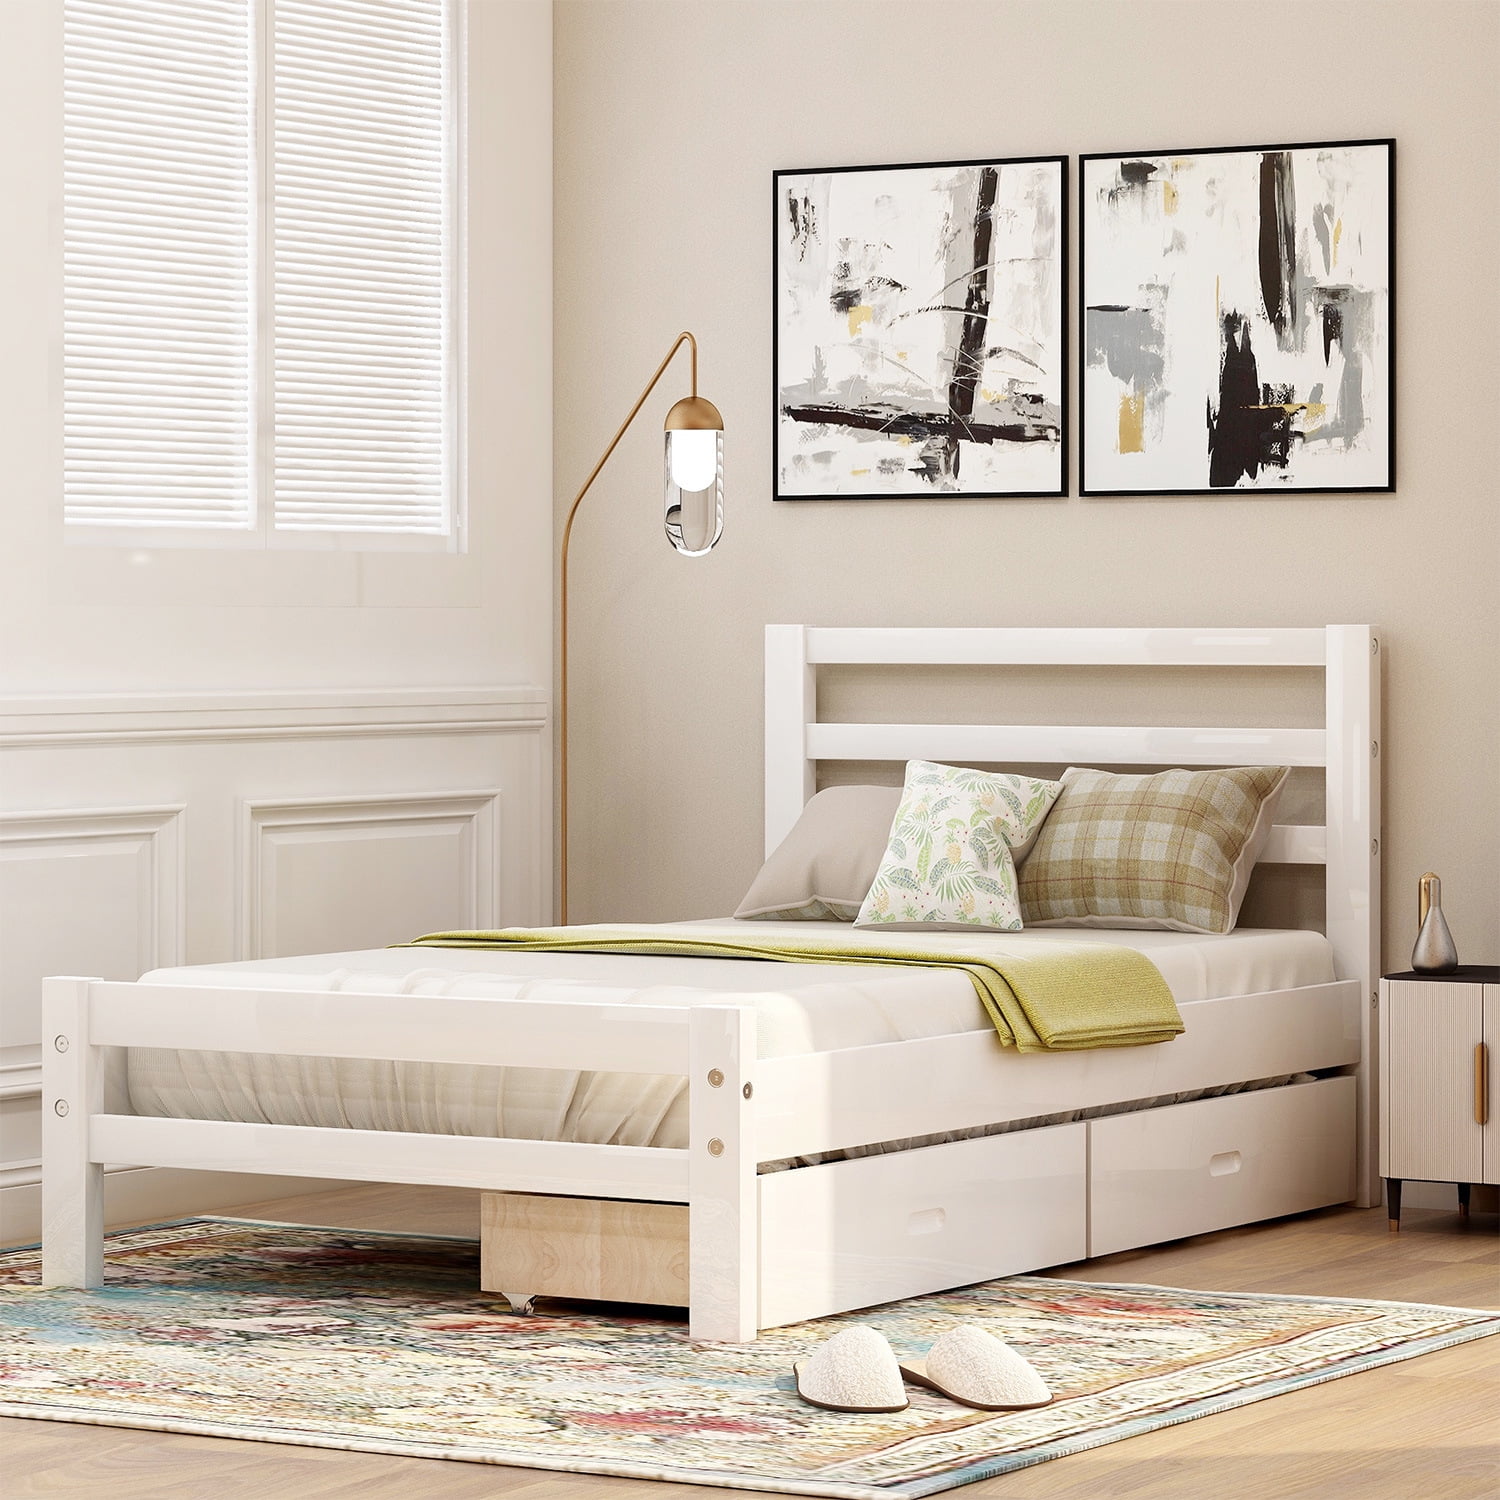 Creatice Platform Bed With Wheels for Small Space